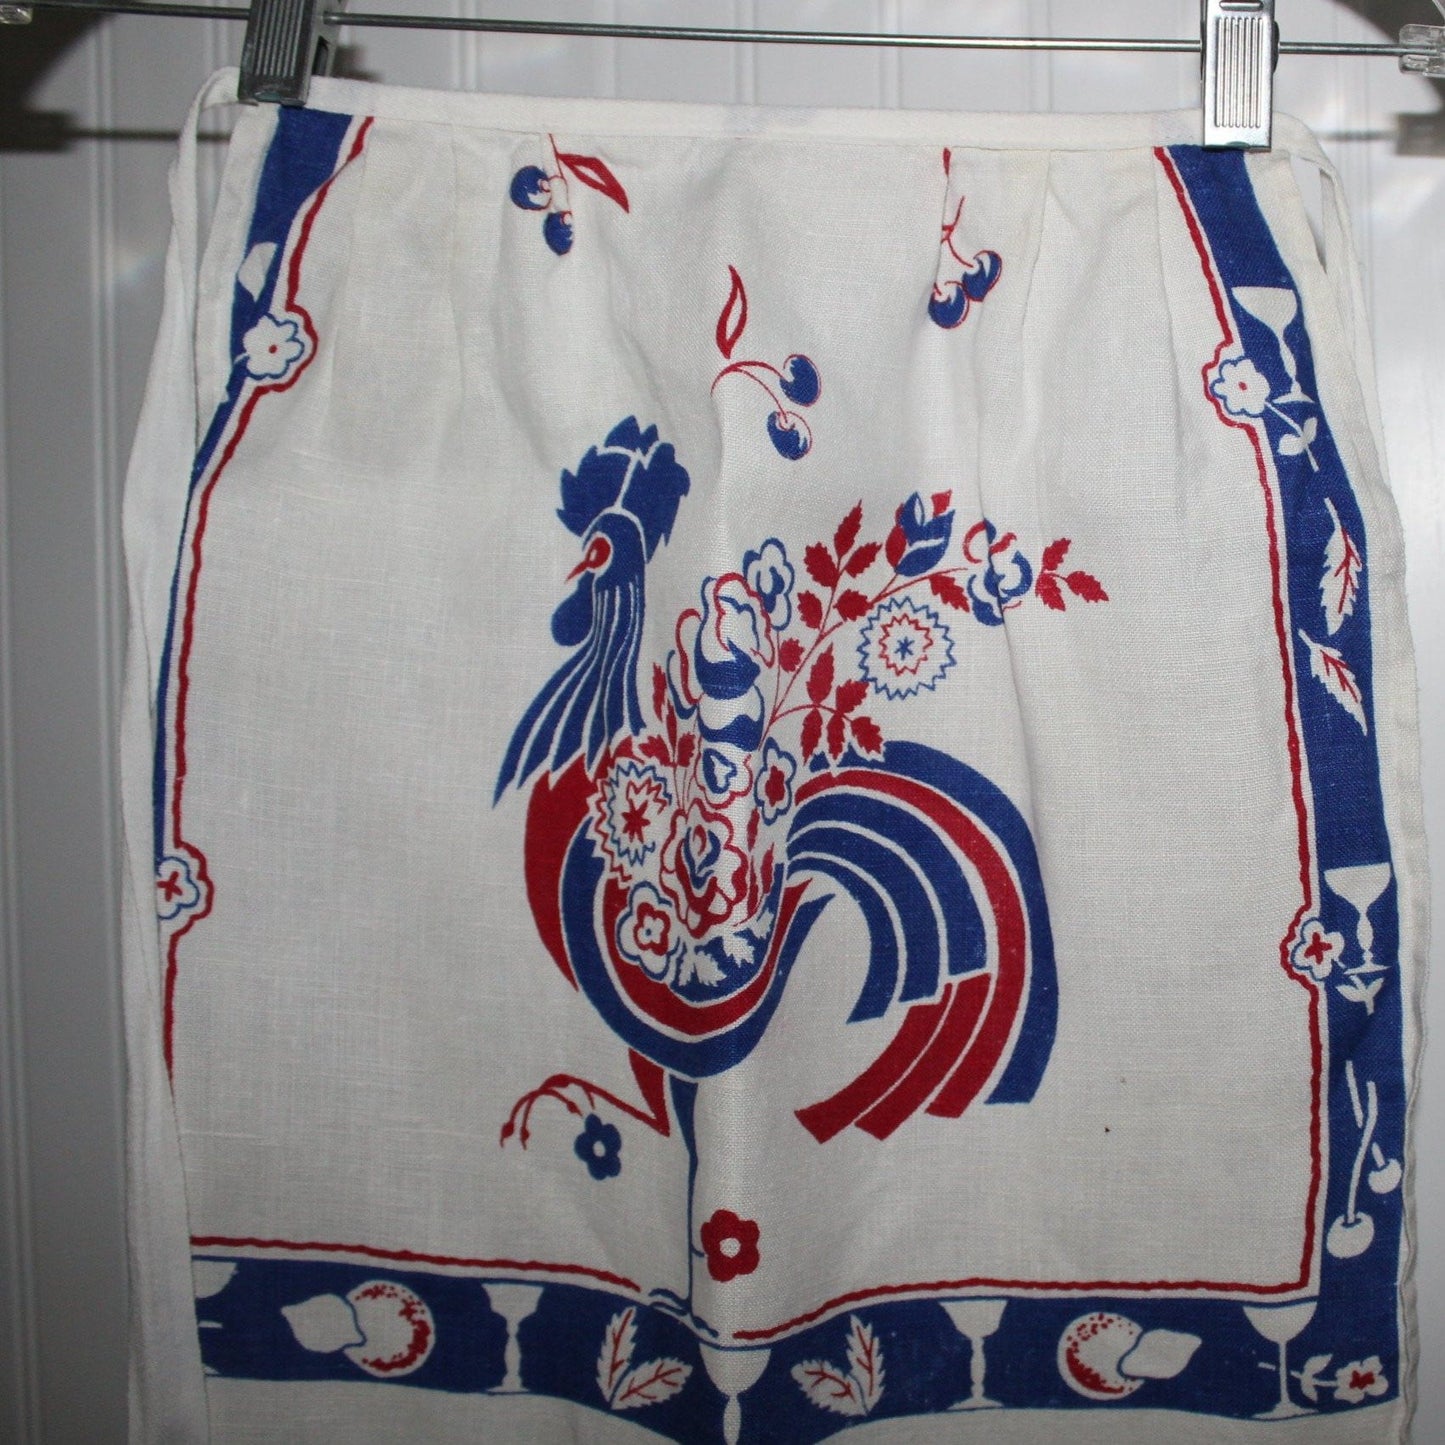 Kitchen Aprons 2 Vintage France Paisley Linen Child's Apron Wear or Pattern Use Rooster